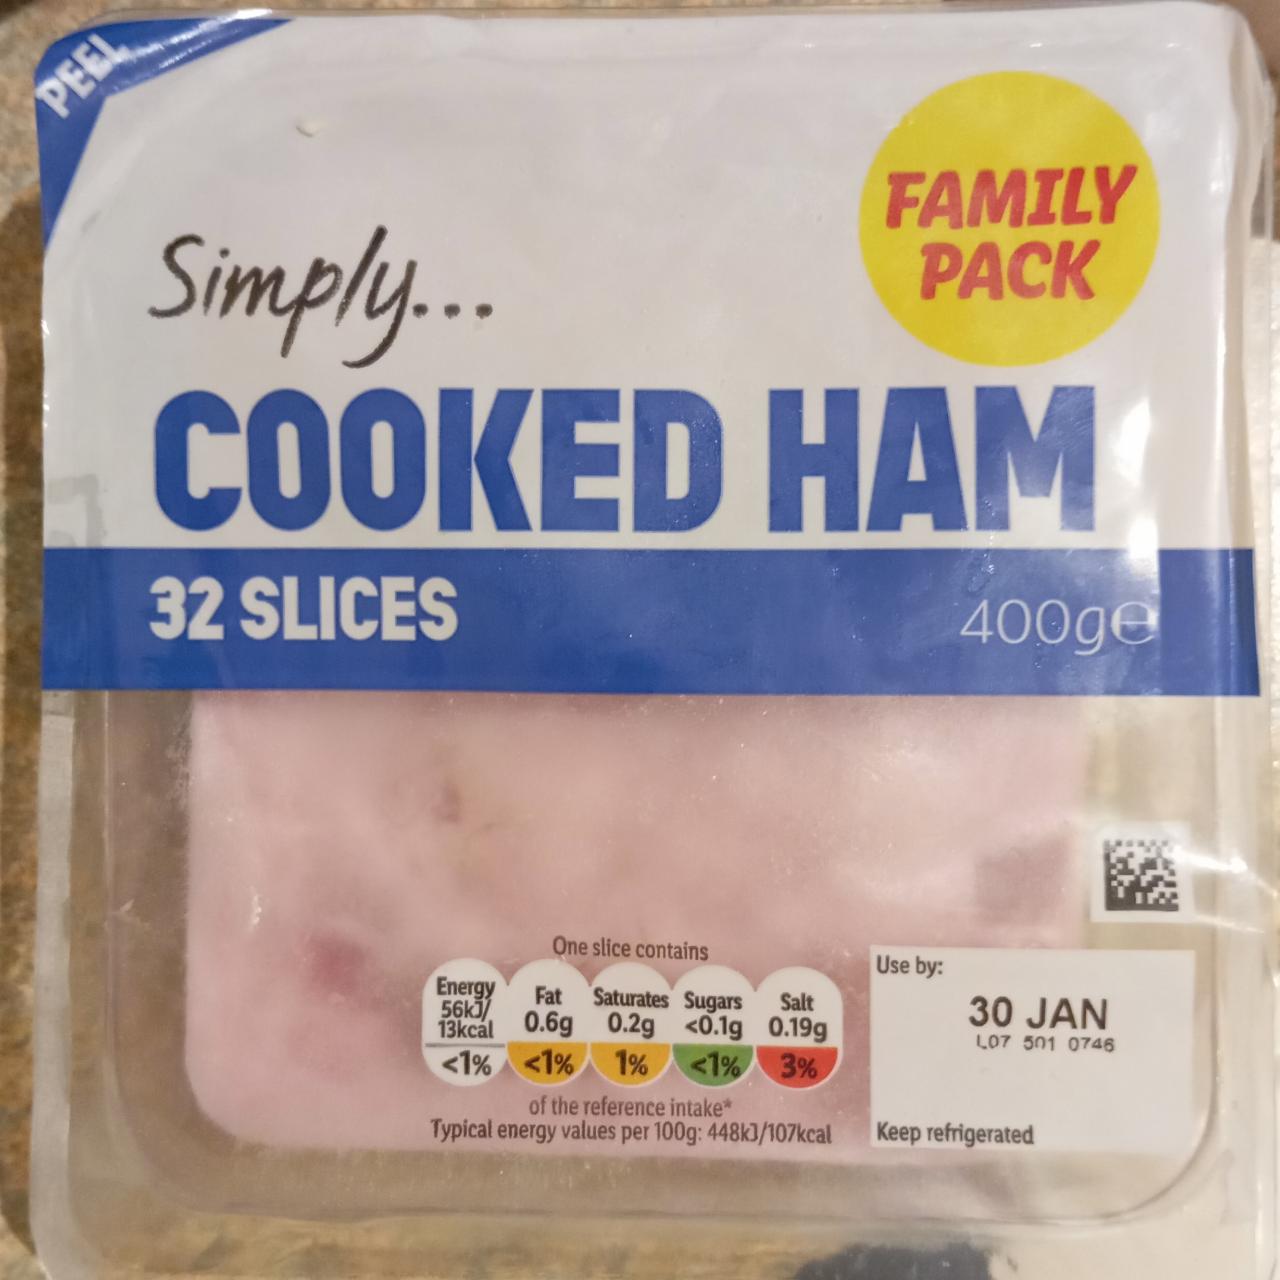 Zdjęcia - Simply Cooked Ham Slices Family Pack Lidl